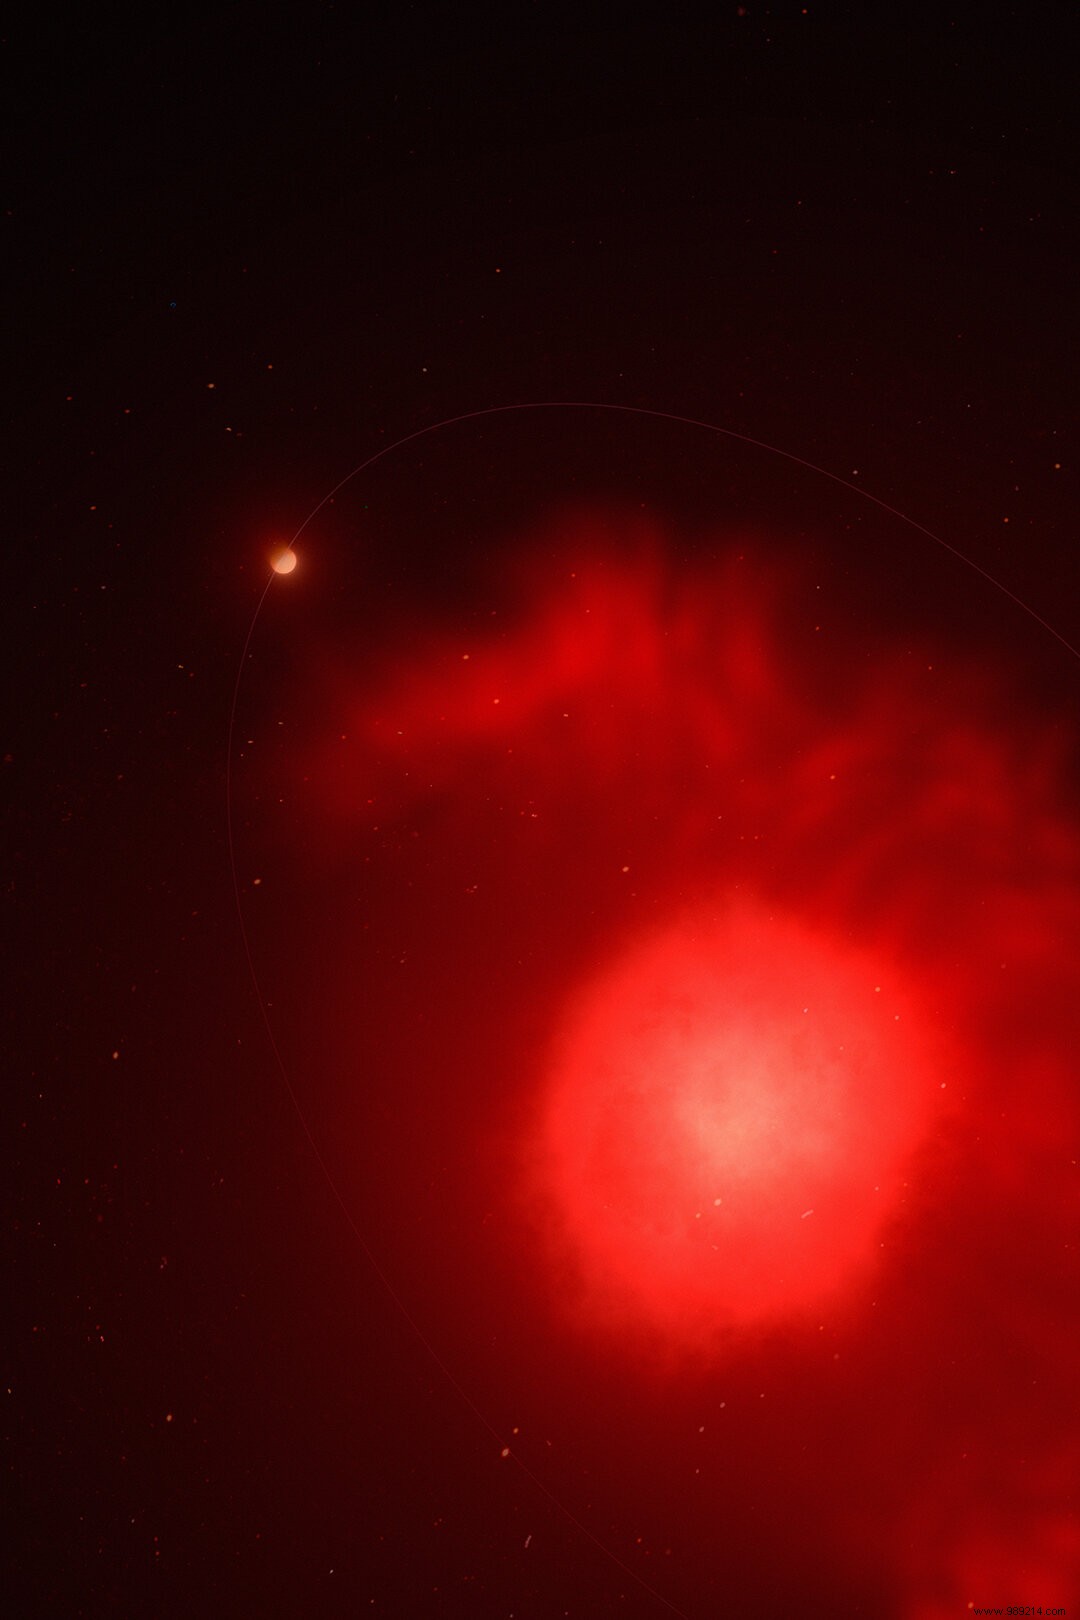 A giant exoplanet survives the death of its star 